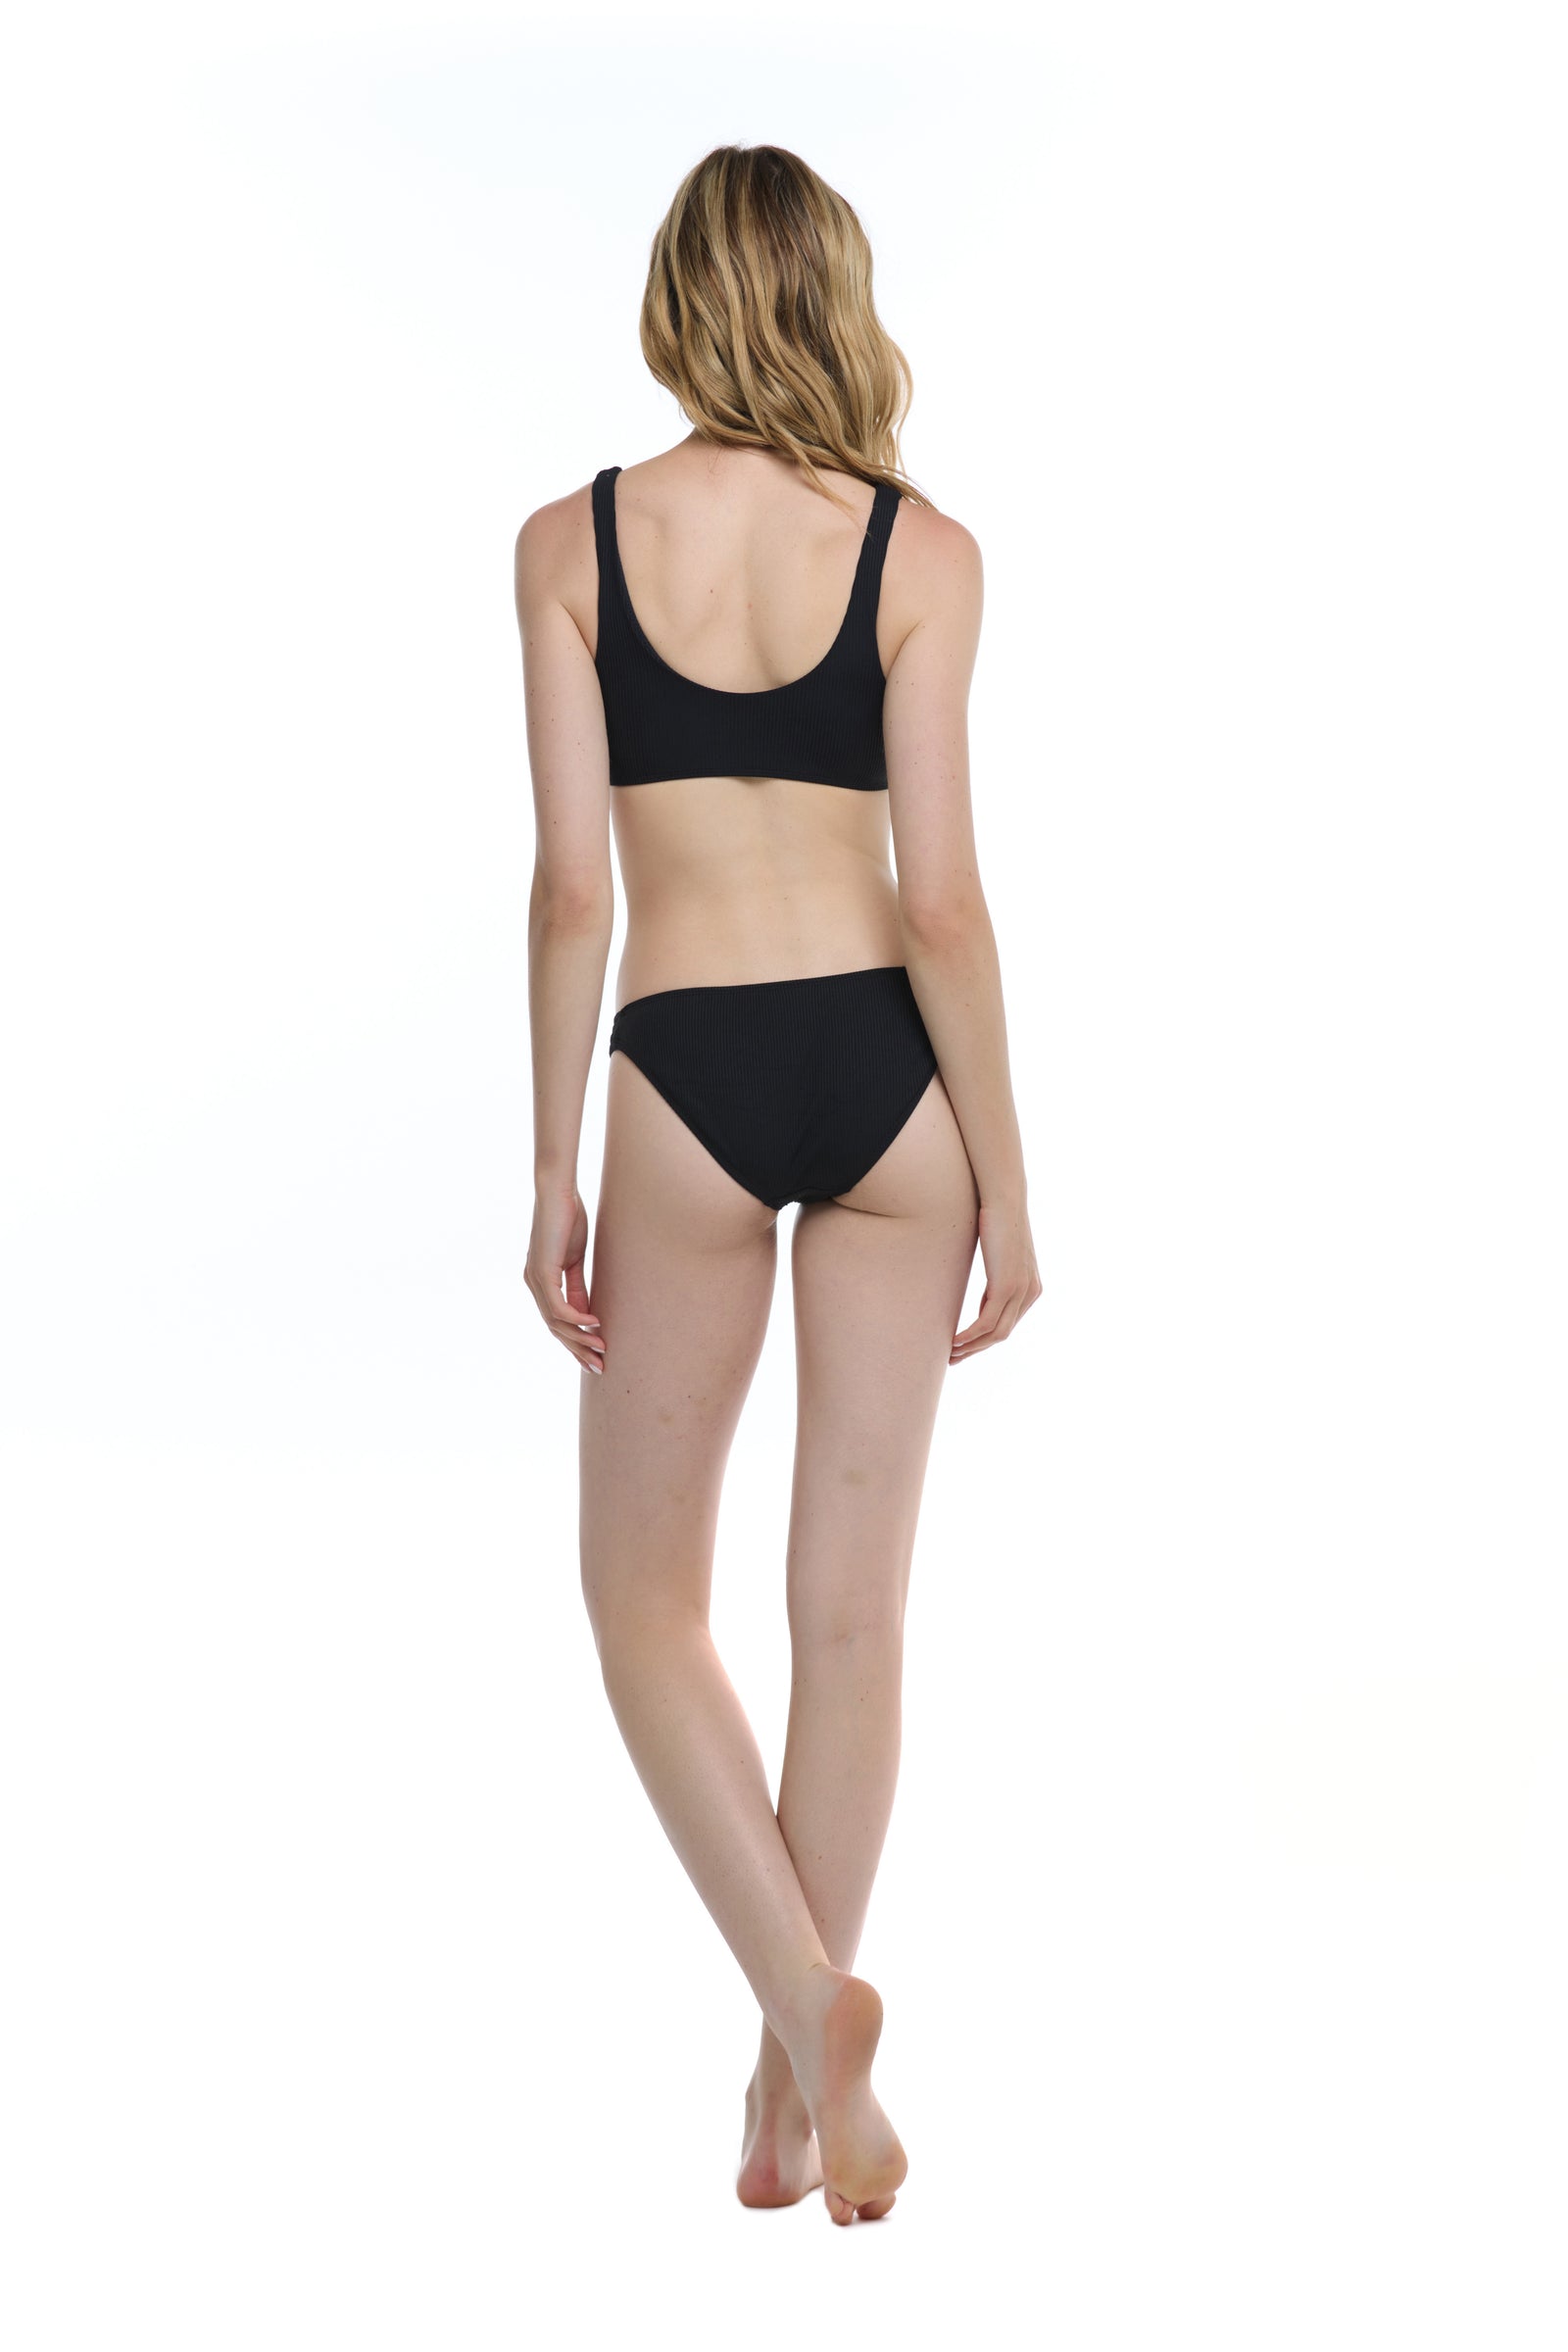 Body Glove Ibiza Kate Scoop Bra  Polyamide/Spandex  Hand wash cold water Top and bottom sold separately Back View